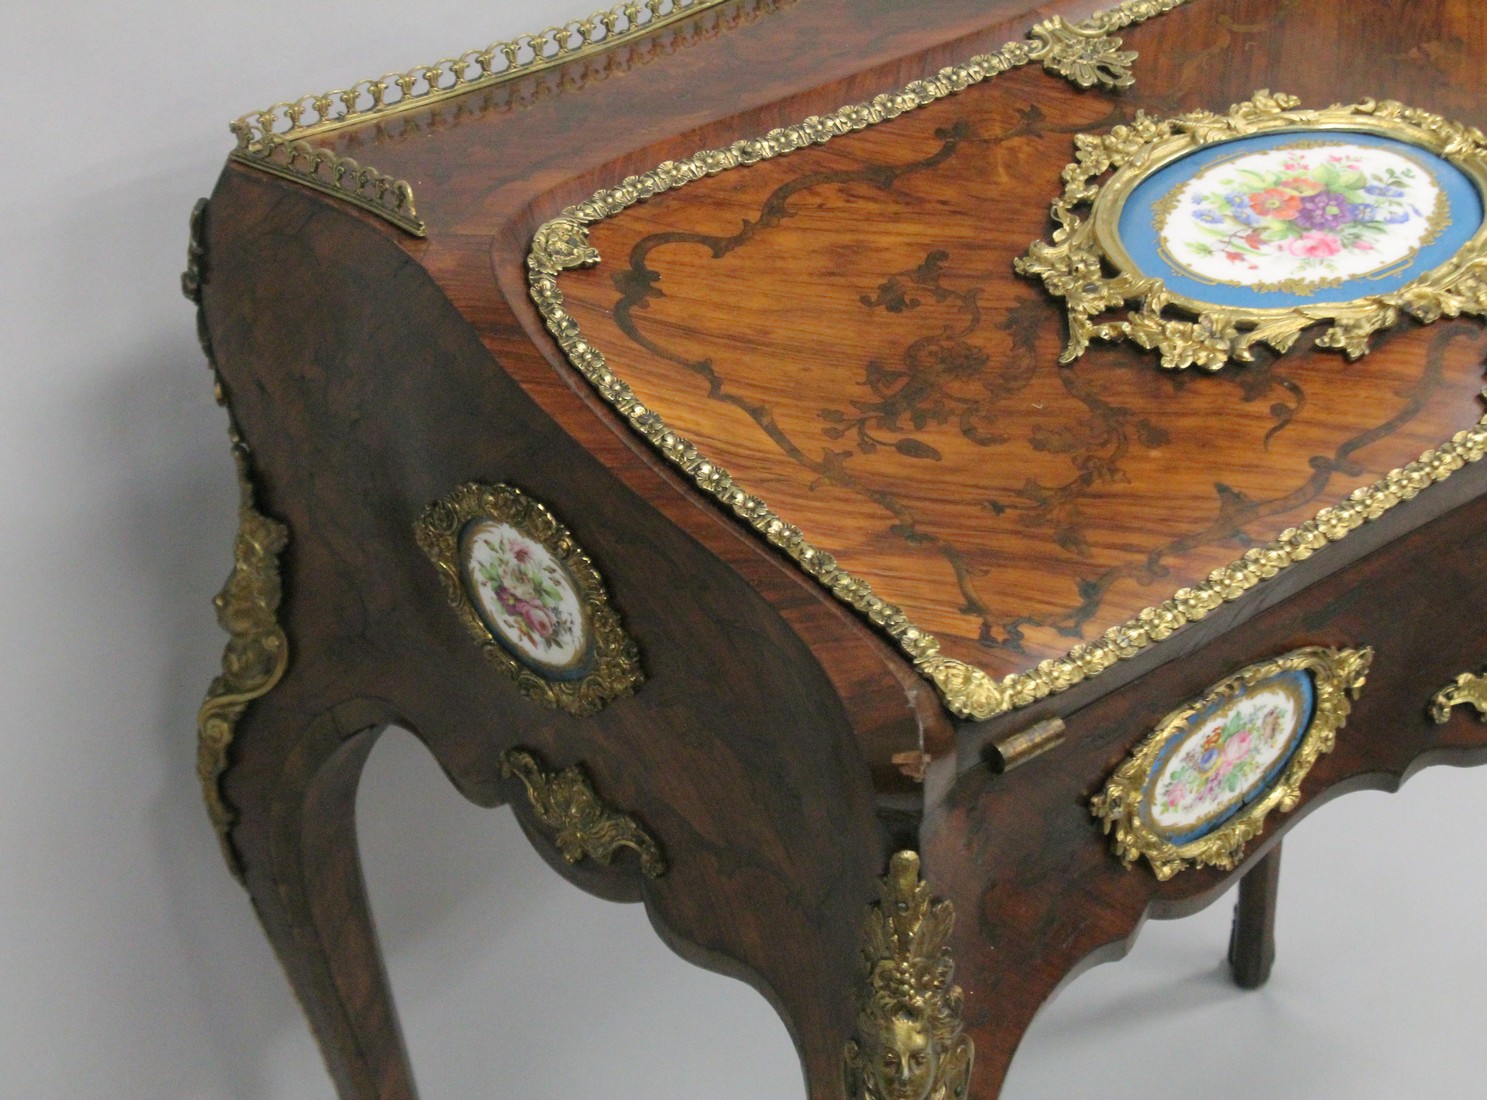 A SUPERB 19TH CENTURY LOUIS XVI STYLE KINGWOOD BUREAU with brass grill, ormolu mounts and inset with - Image 12 of 12